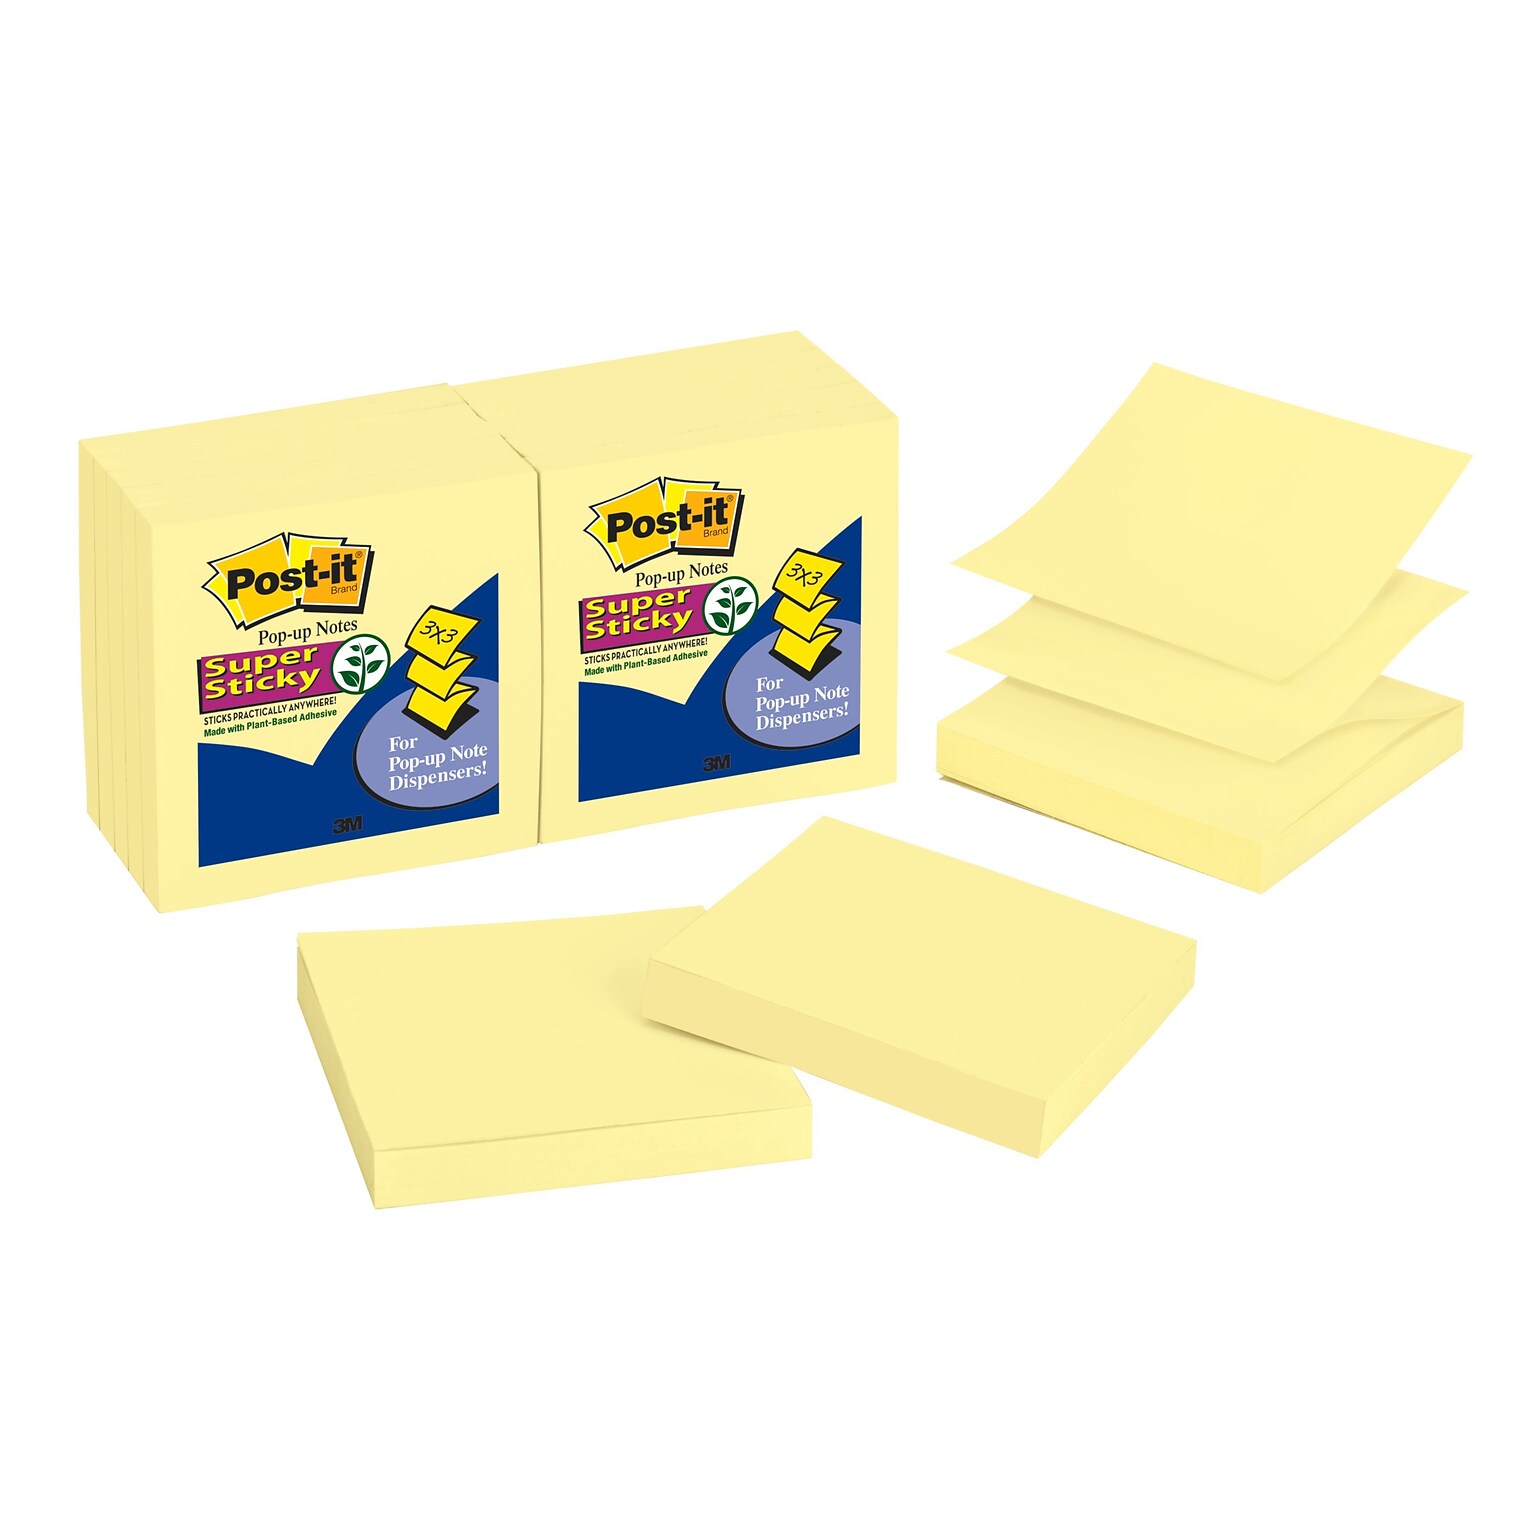 Post-it Super Sticky Pop-up Notes, 3 x 3, Canary Collection, 90 Sheet/Pad, 12 Pads/Pack (R33012SSCY)